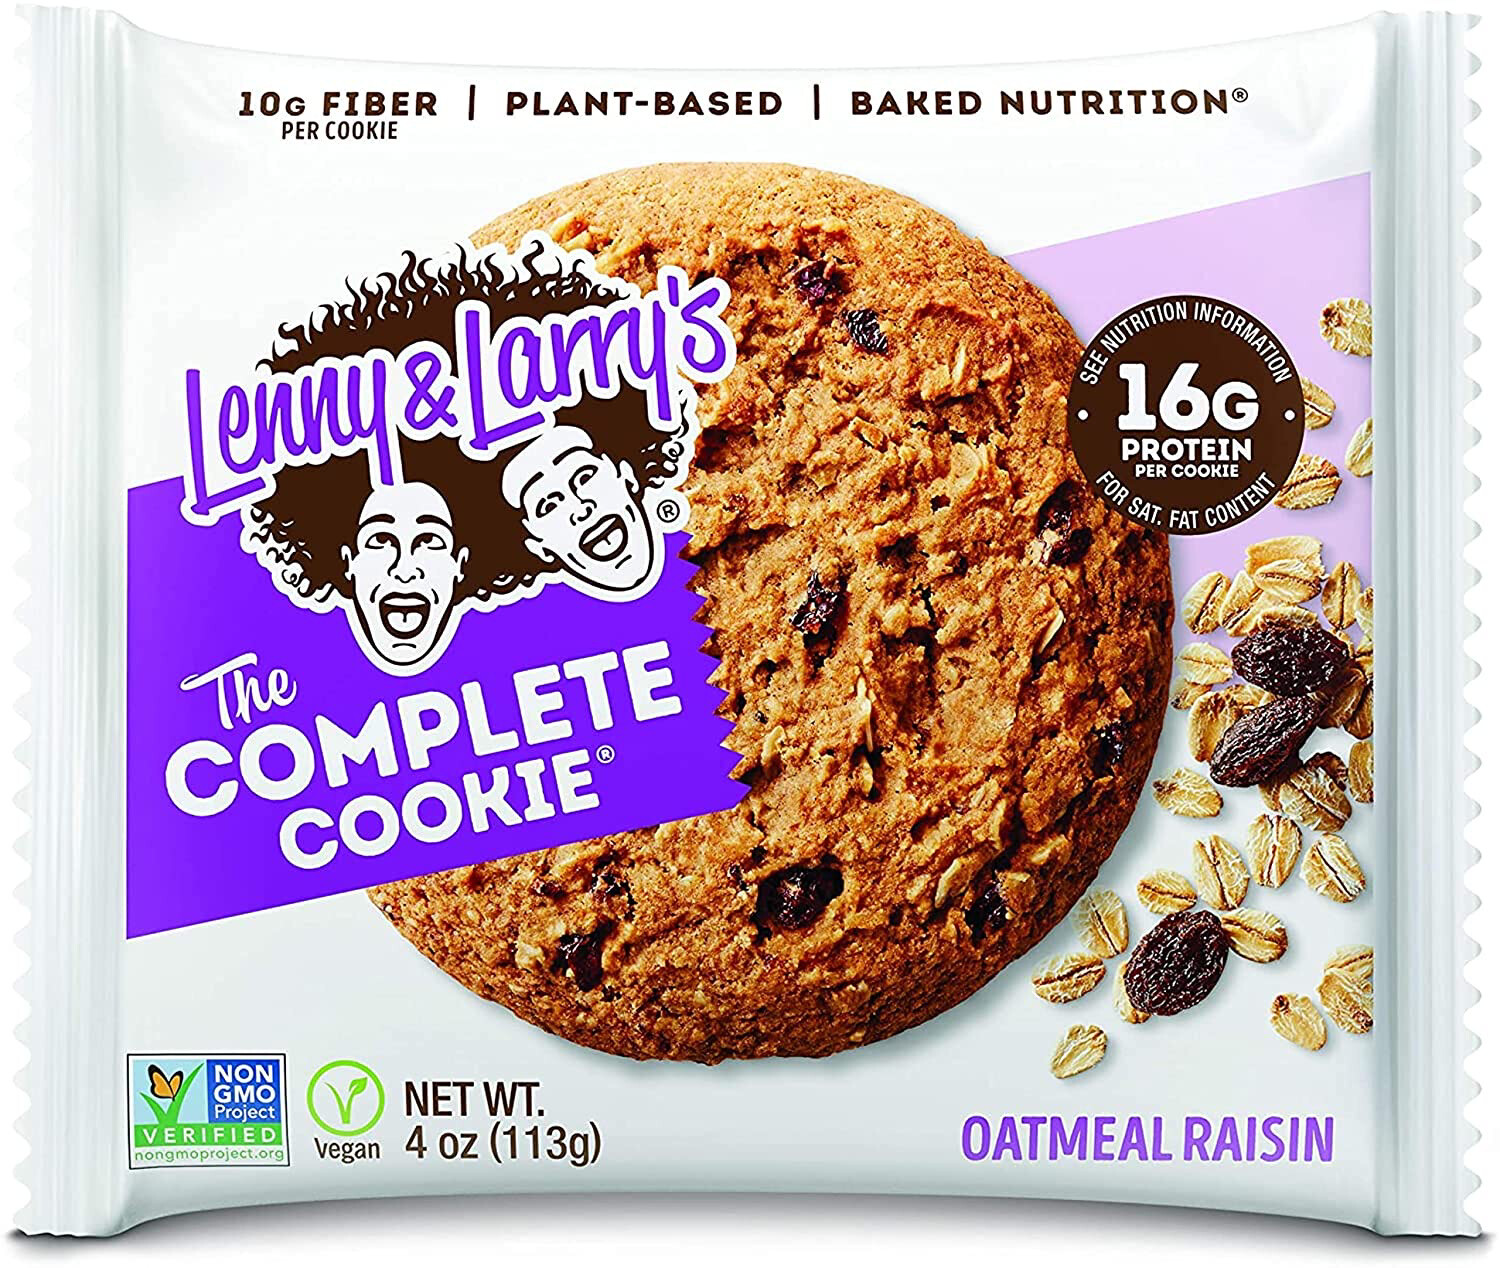 Lenny & Larry’s The Complete Cookie Oatmeal Raisin Plant Based 16 g Protein Vegan 